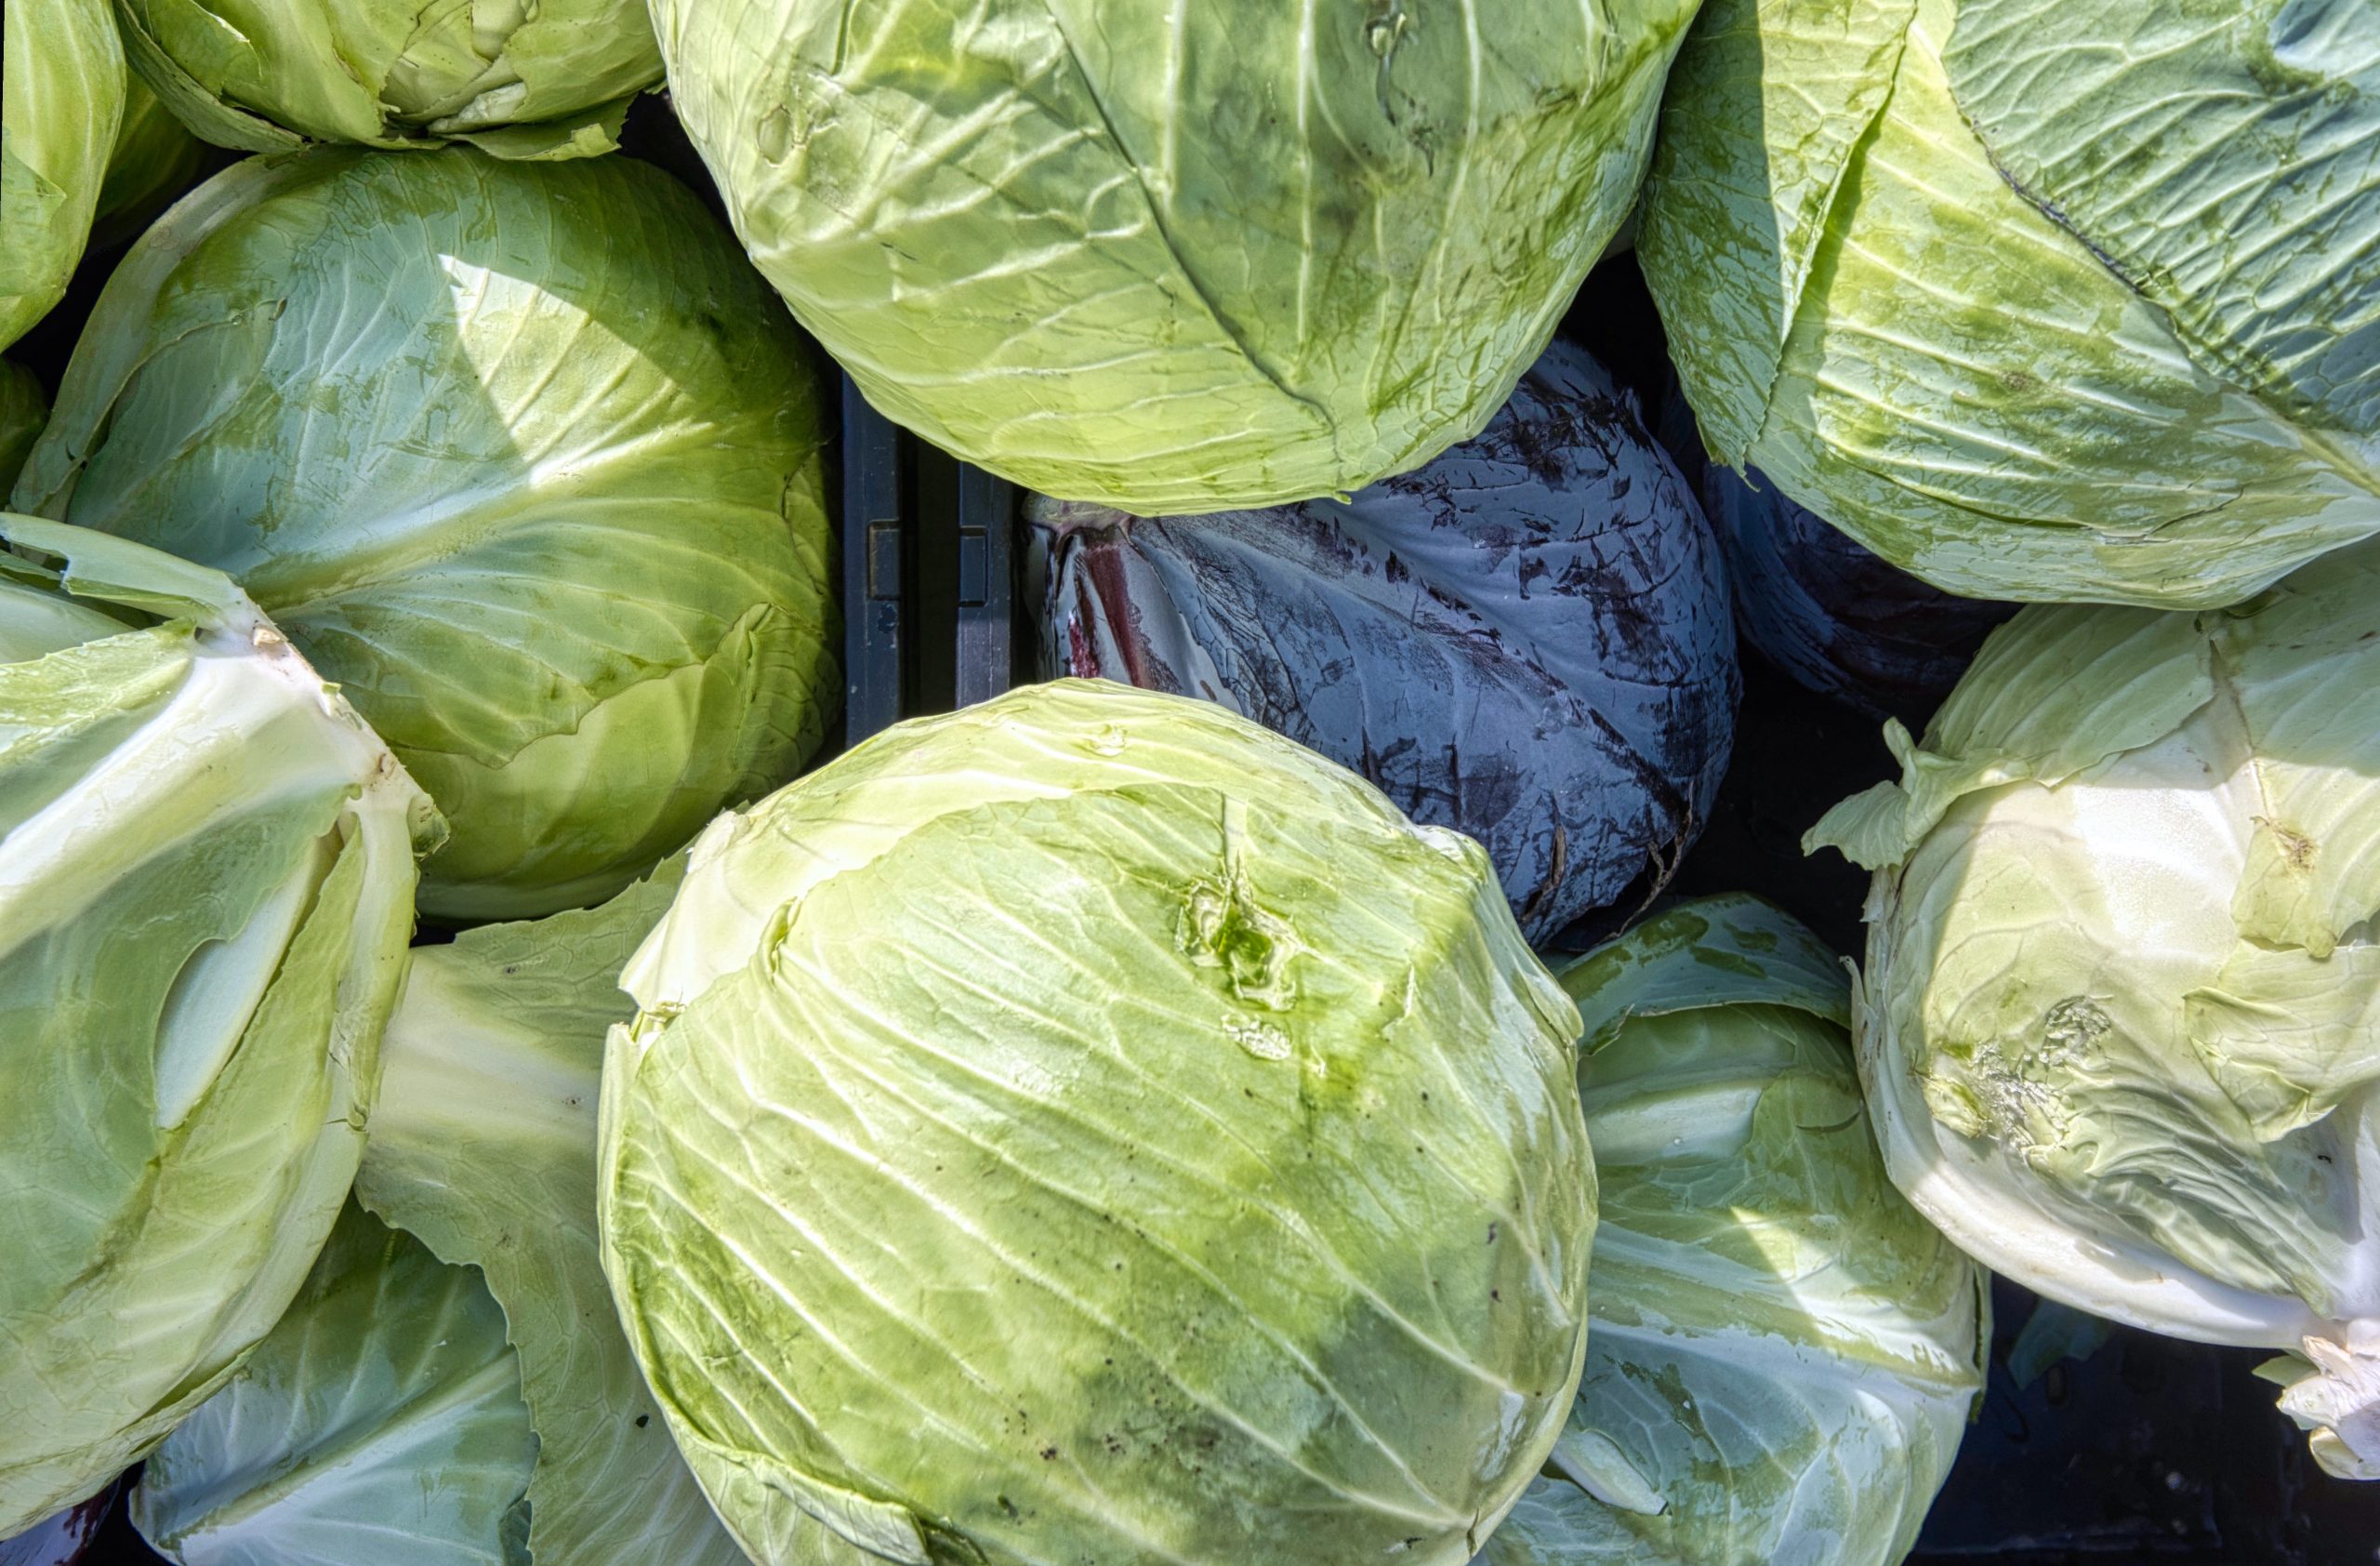 How Can You Tell The Difference Between Cabbage And Lettuce?